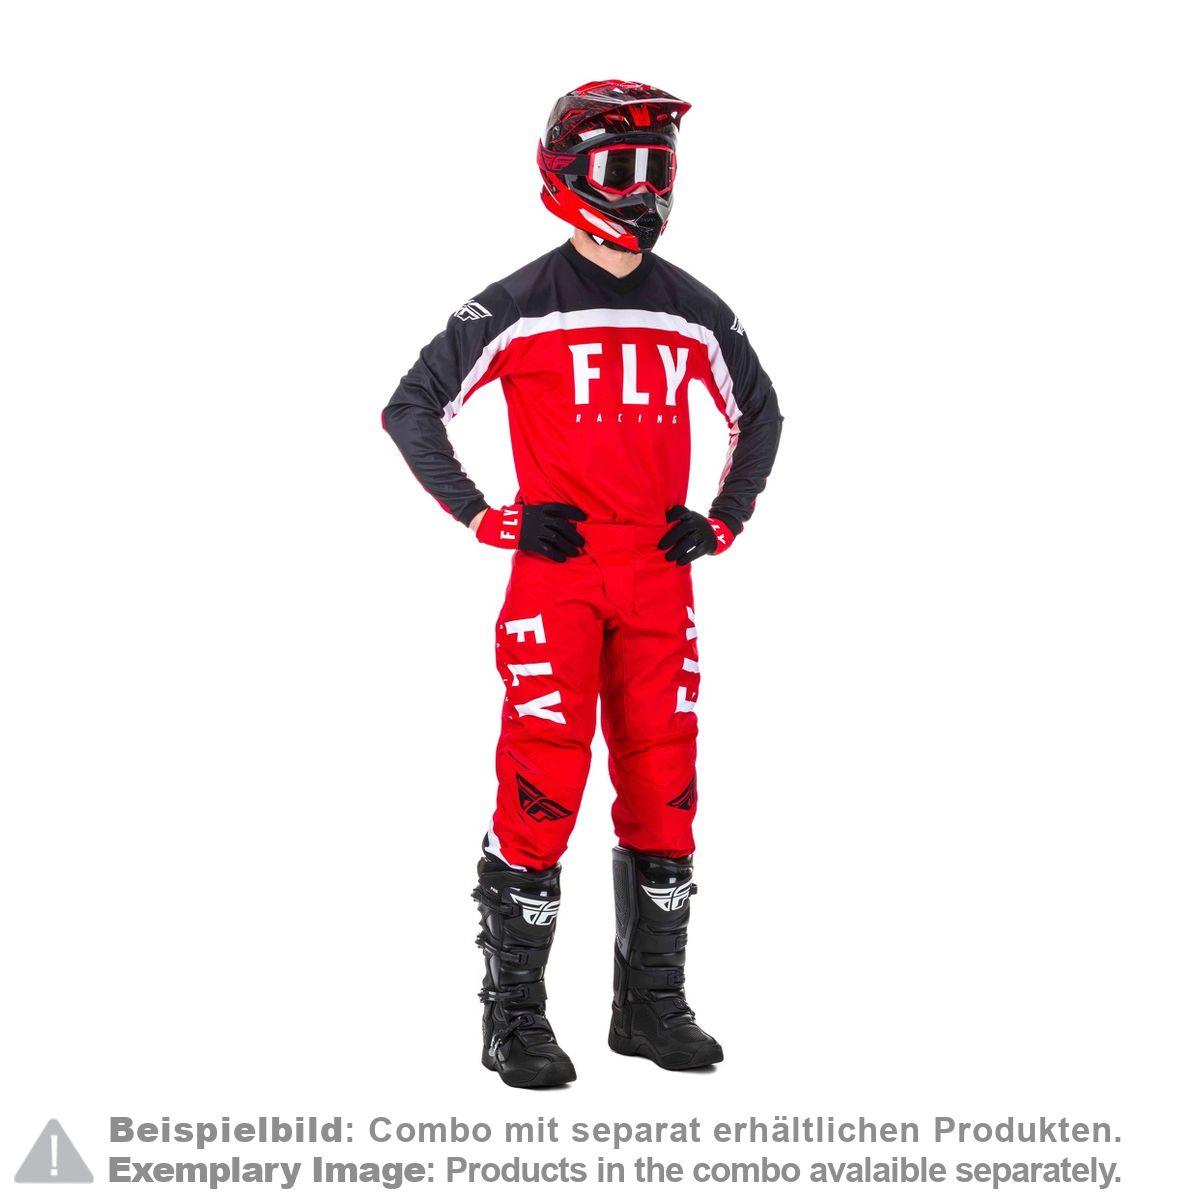 Red//Black//White 2020 Fly F-16 Youth MX Gear Combo